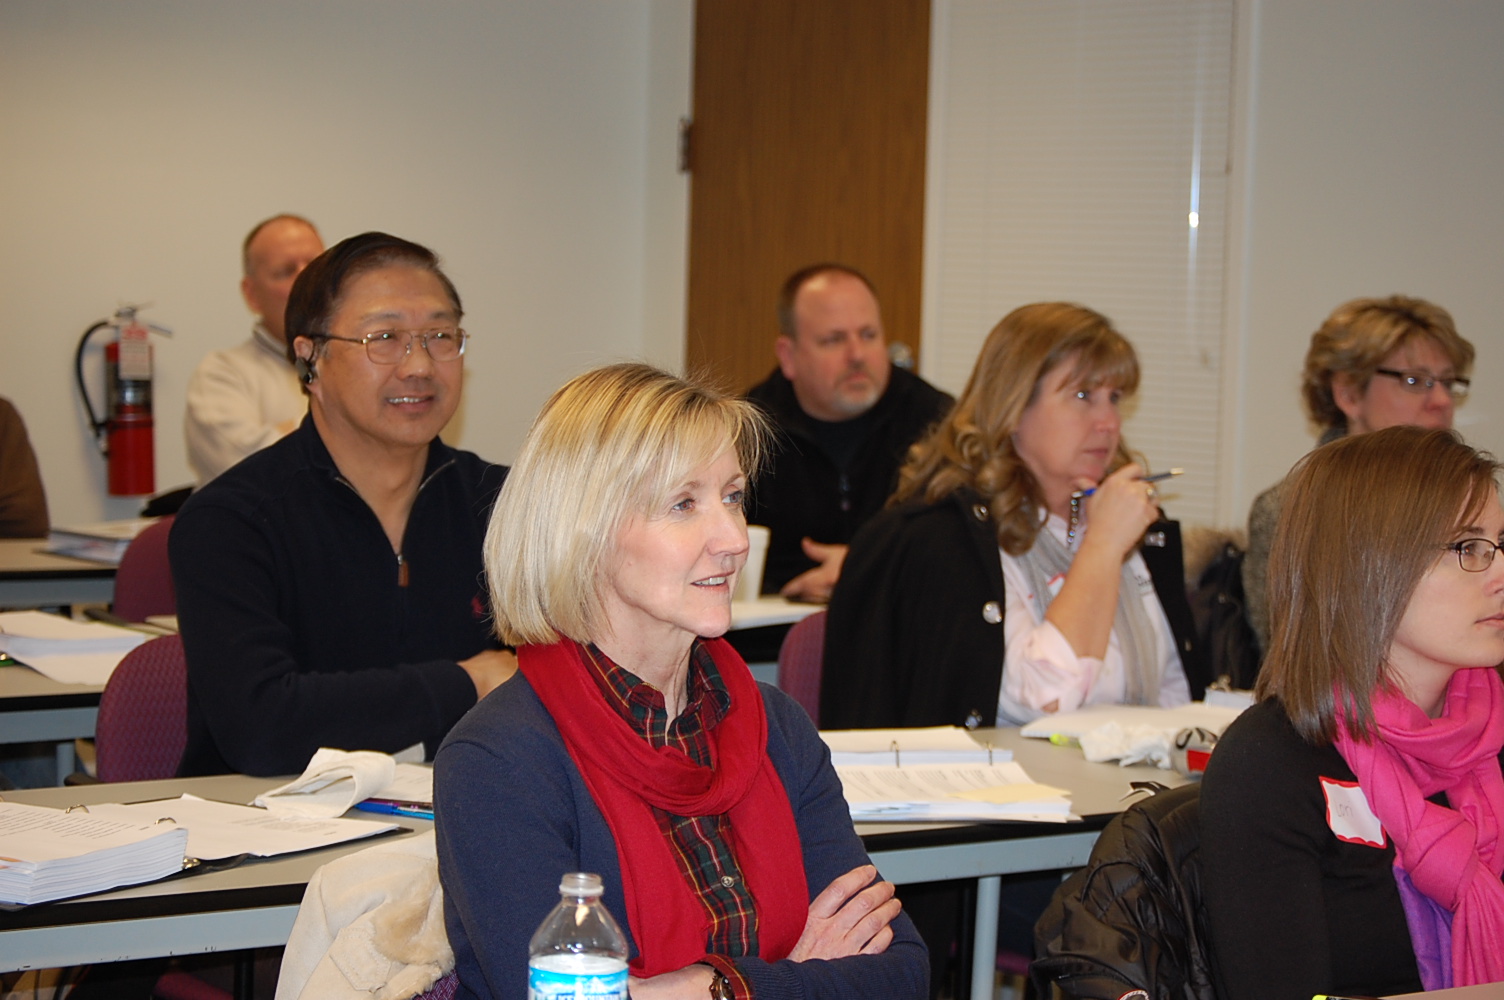 Professional advisors attend a National Social Security Advisor education and certification course. (Oak Tree Communications Photo)